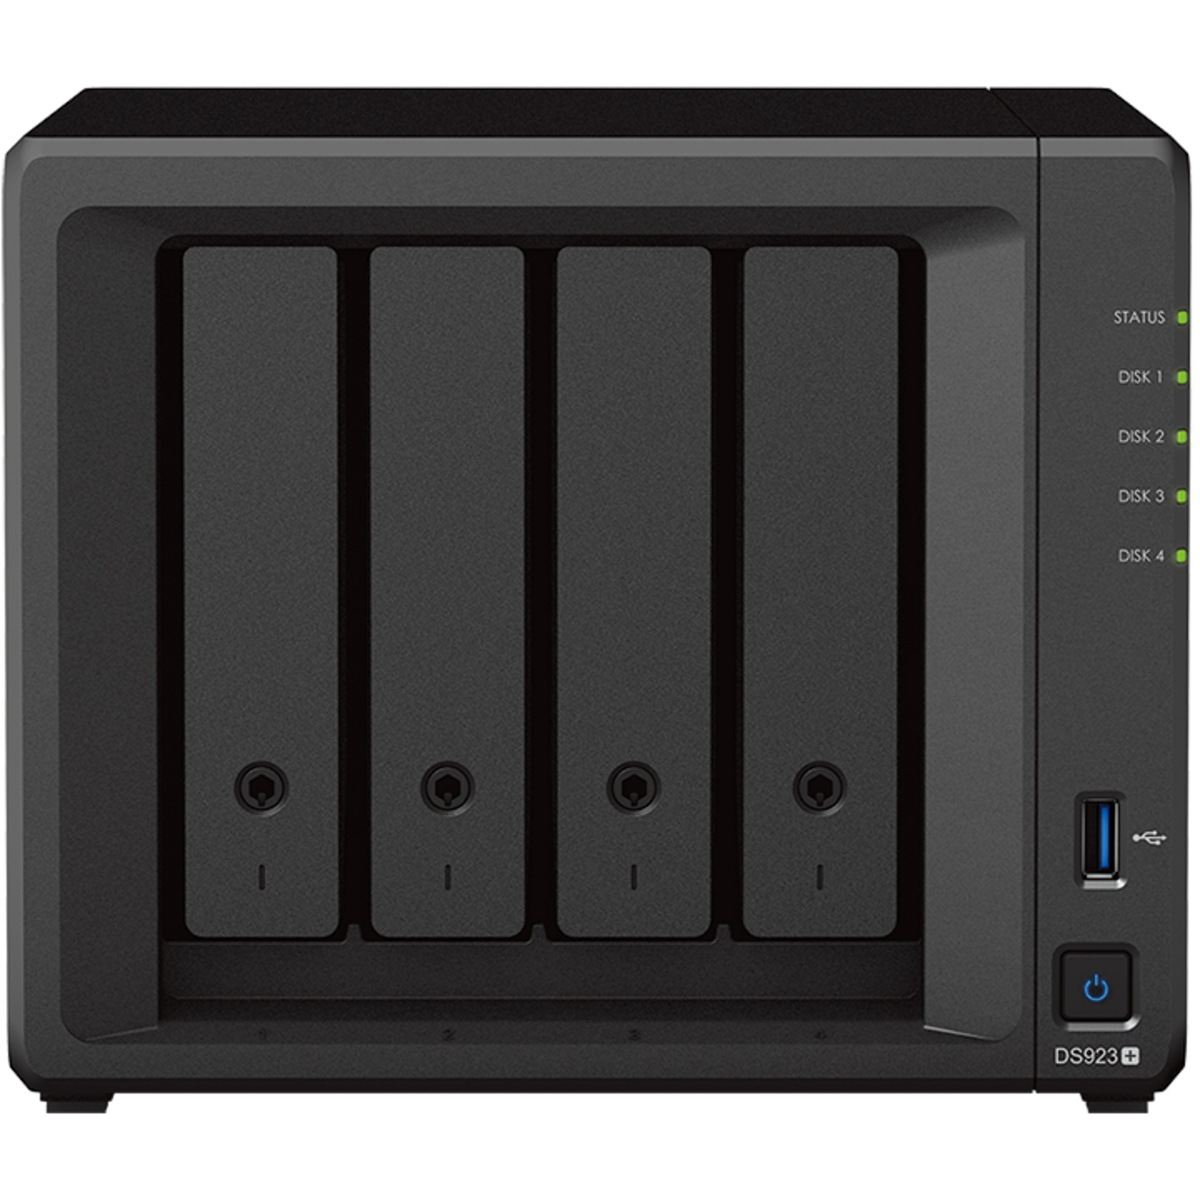 Synology DiskStation DS923+ 96tb 4-Bay Desktop Multimedia / Power User / Business NAS - Network Attached Storage Device 4x24tb Seagate IronWolf Pro ST24000NT002 3.5 7200rpm SATA 6Gb/s HDD NAS Class Drives Installed - Burn-In Tested - ON SALE - FREE RAM UPGRADE DiskStation DS923+